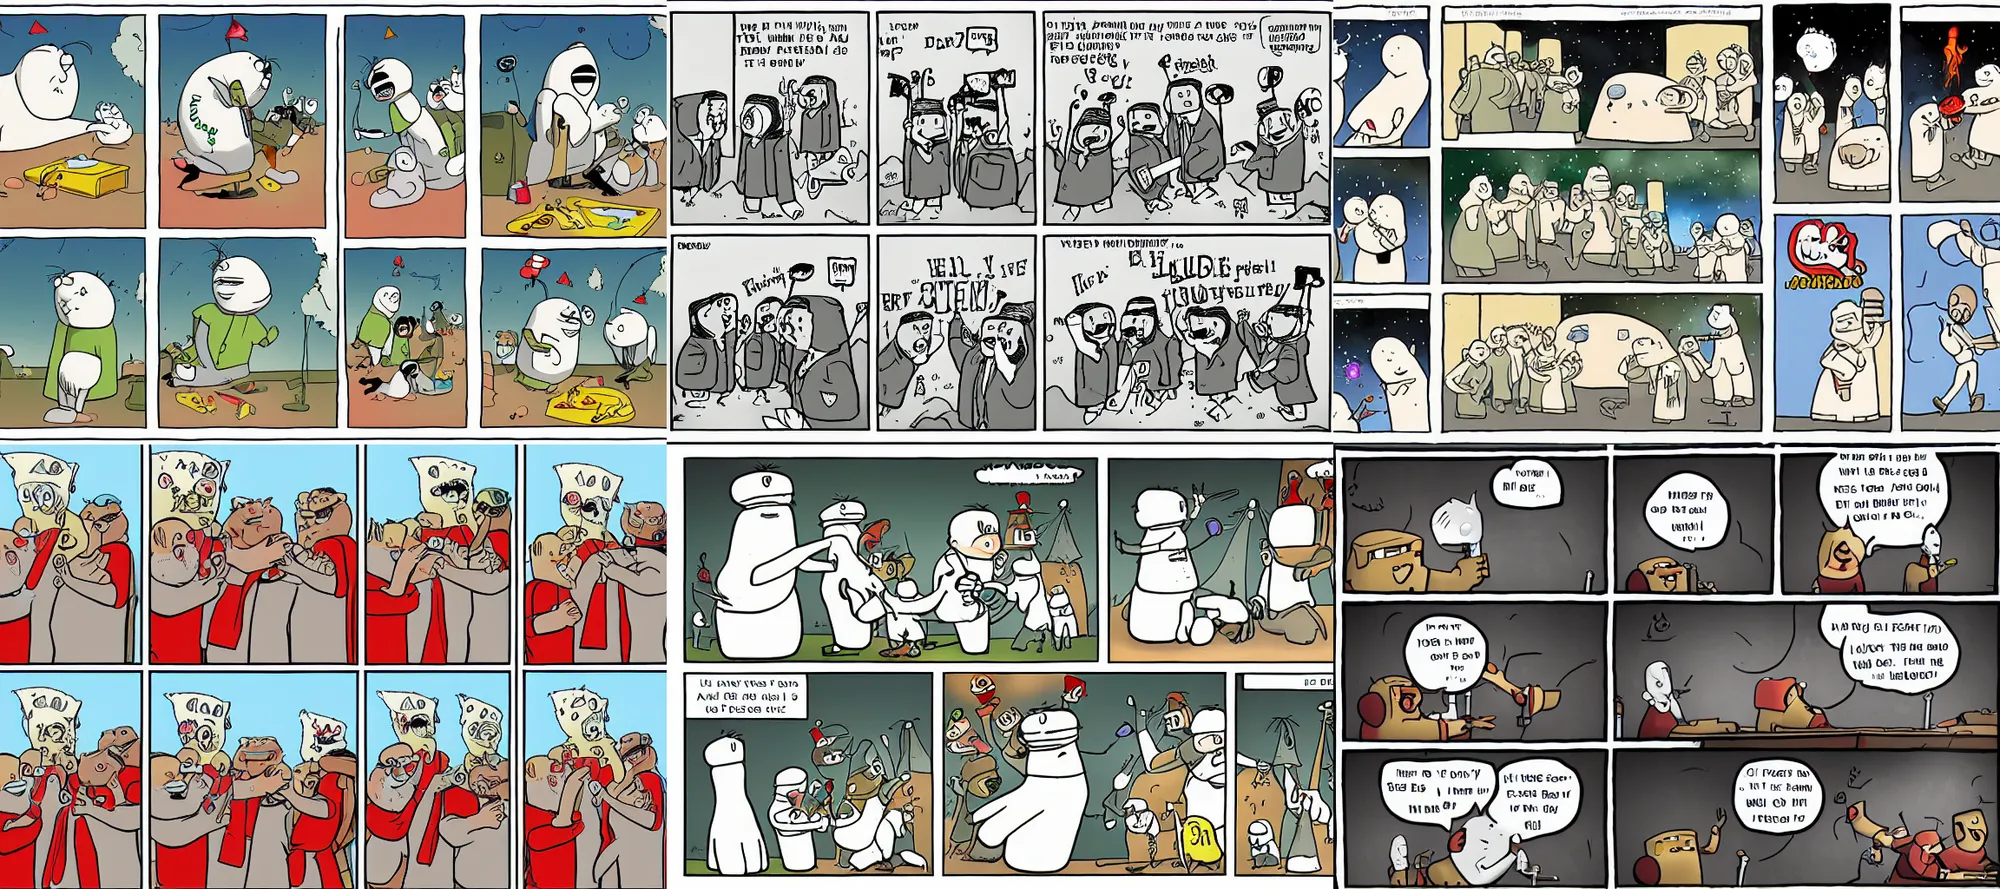 Prompt: funny perry bible fellowship comic, hd, high resolution, 4k, print